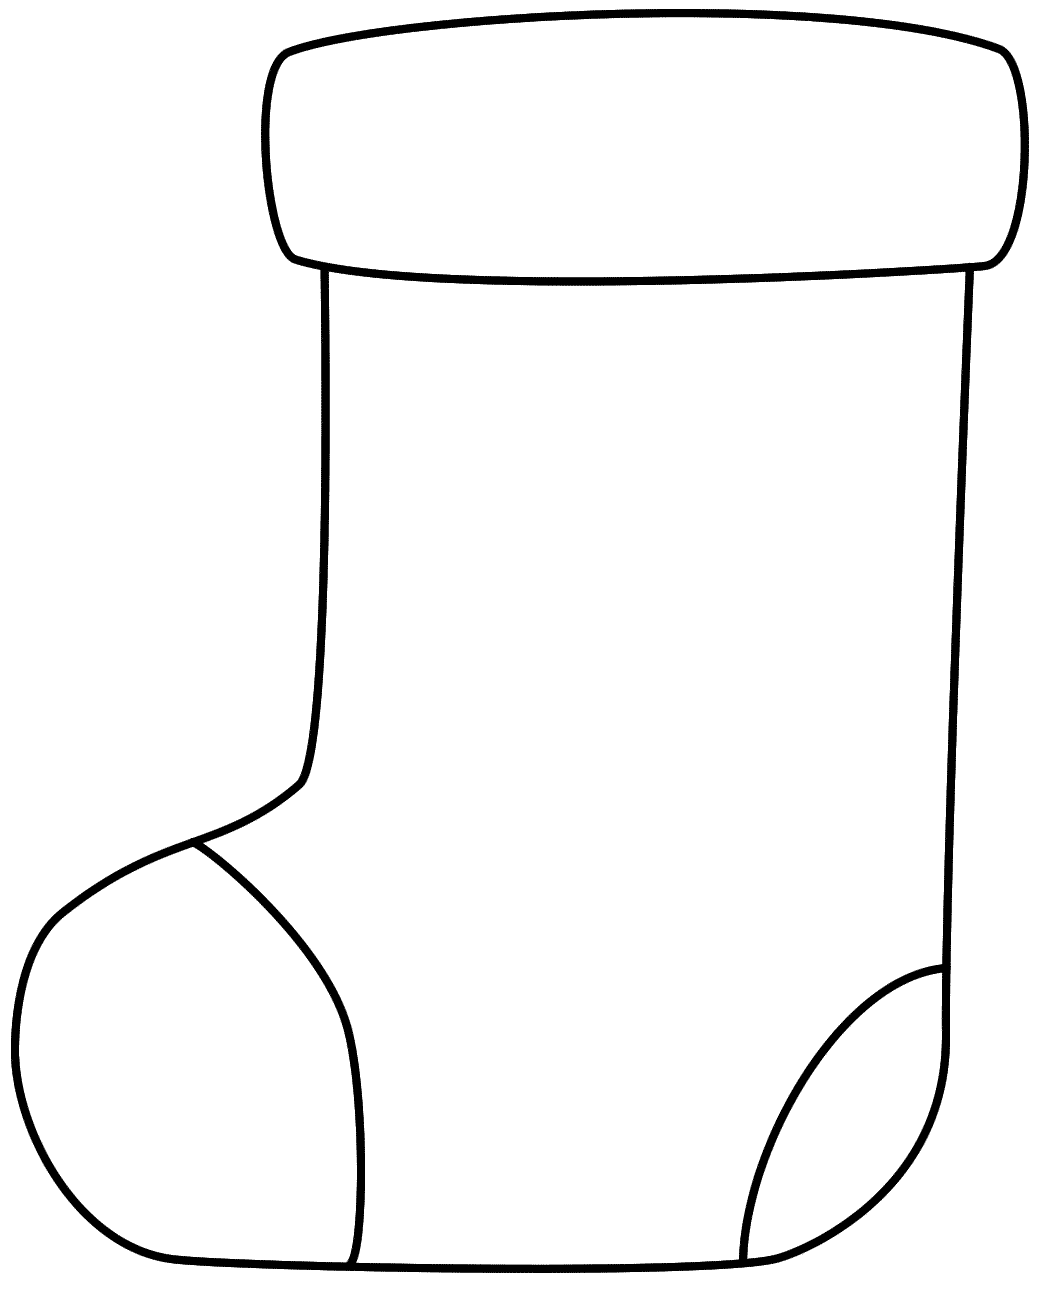 Free Black And White Christmas Stockings Download Free Black And White Christmas Stockings Png Images Free Cliparts On Clipart Library